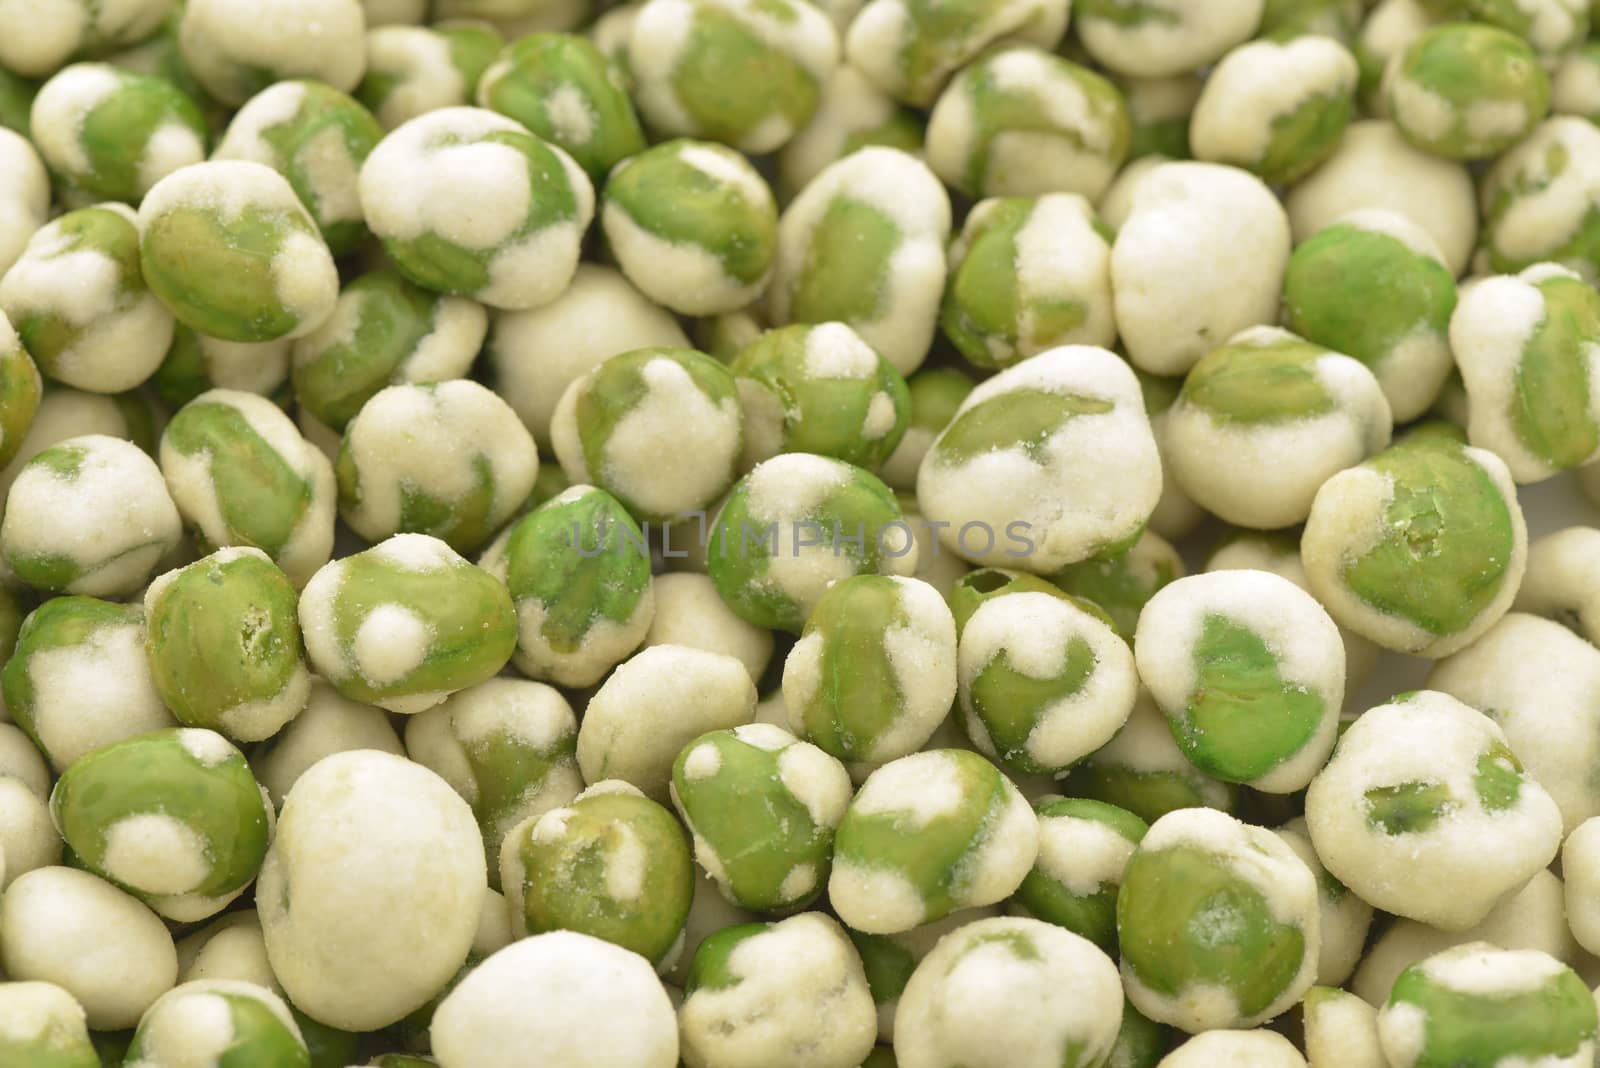 Close-up of white and green wasabi peas